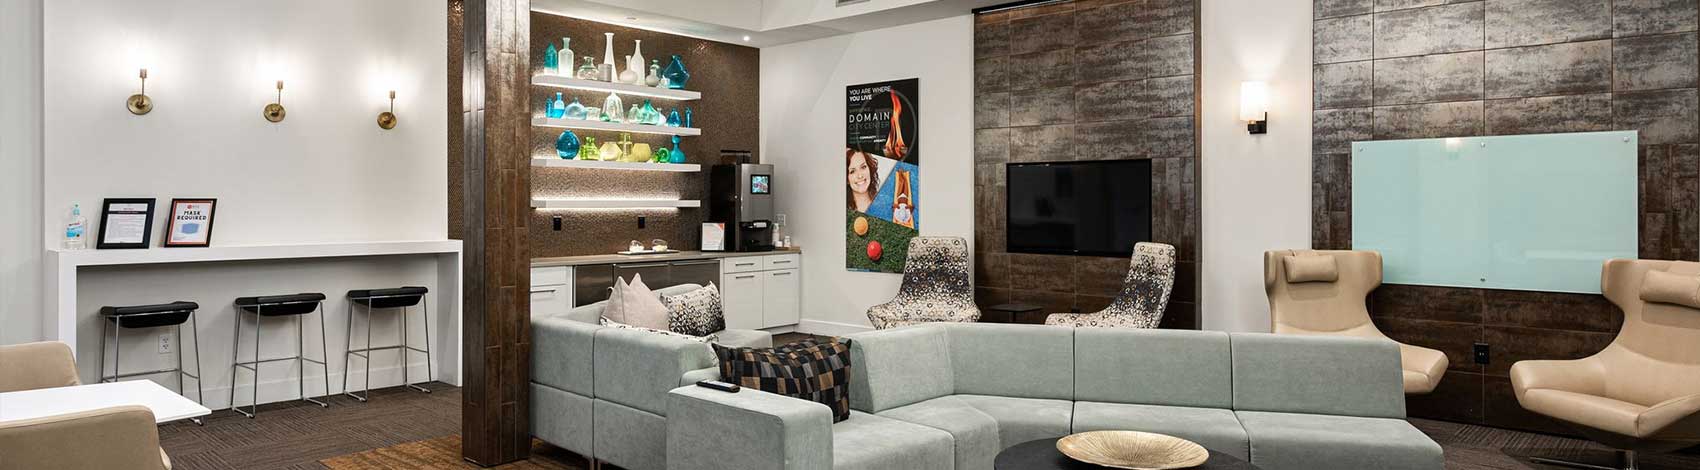 Residents Lounge at Domain City Center Luxury Apartments